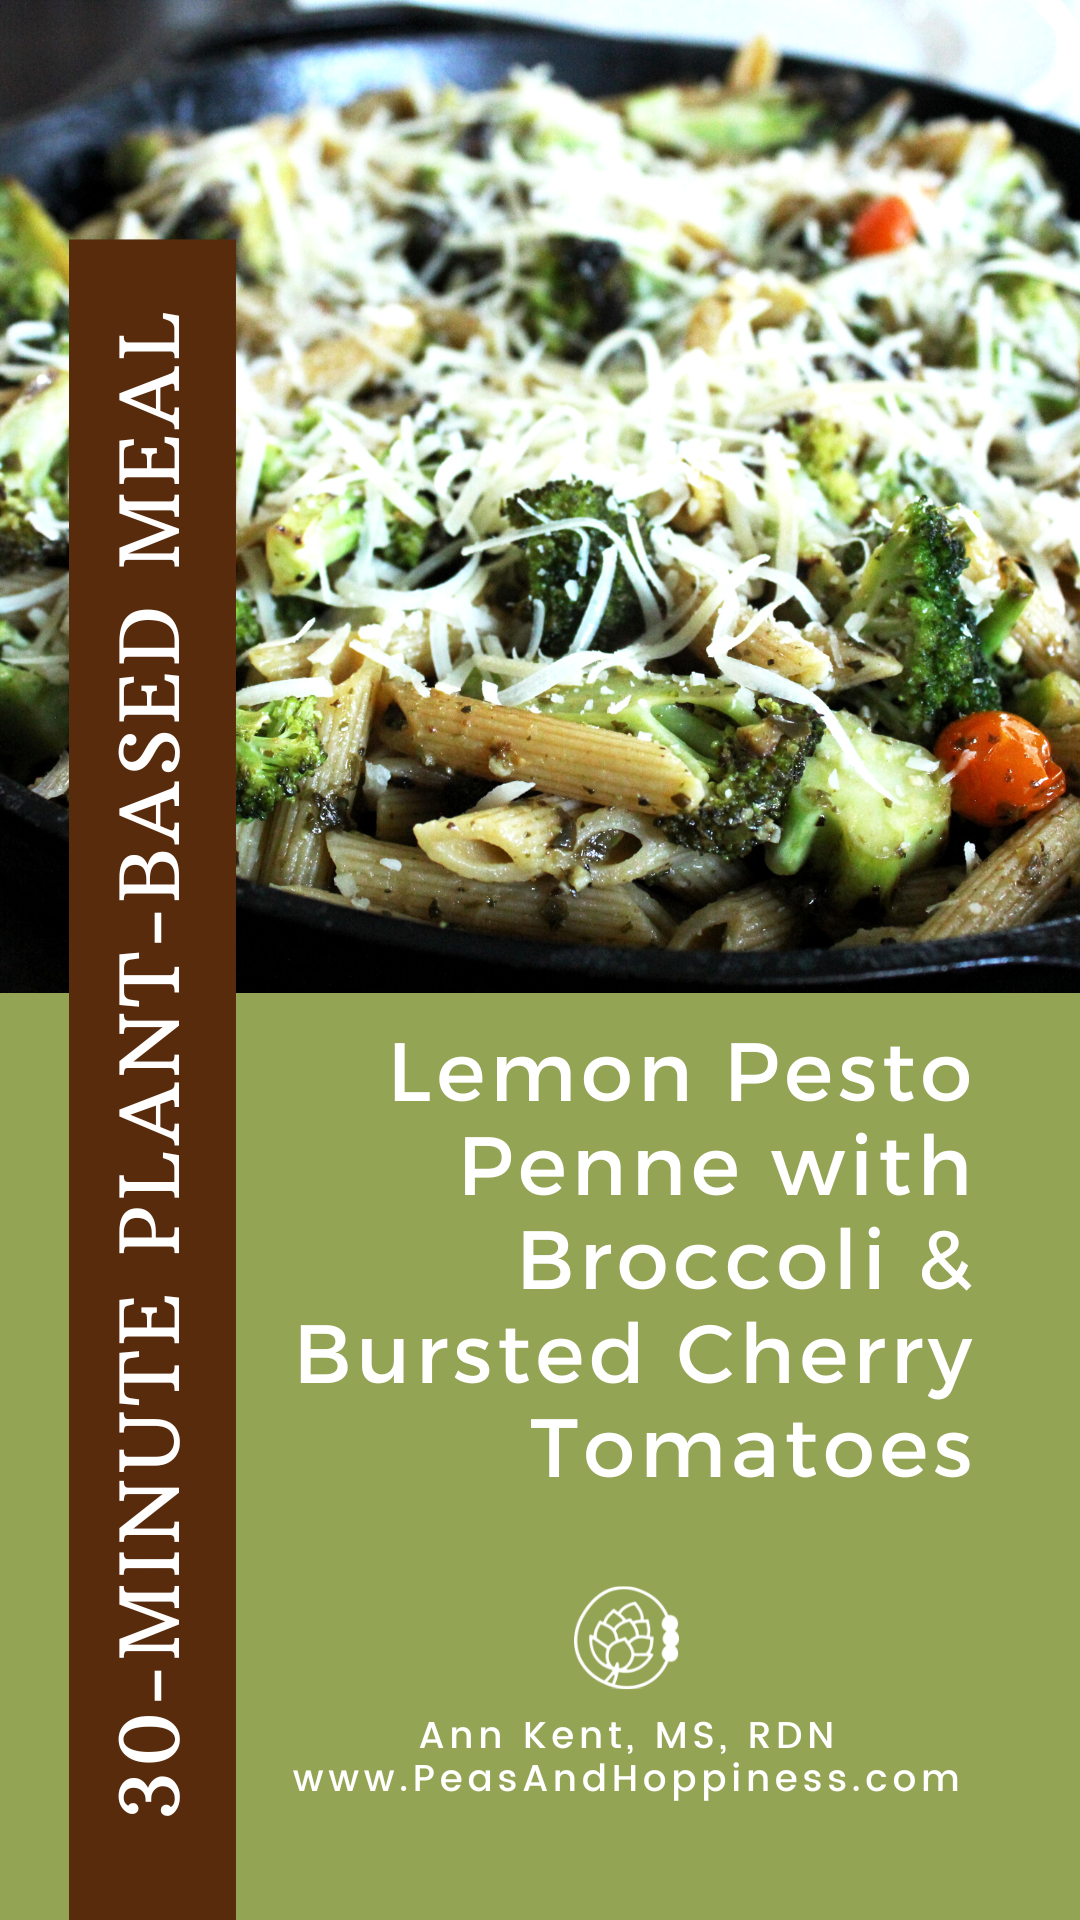 30 Minute Meal Recipe for Lemon Pesto Penne with Broccoli and Bursted Cherry Tomatoes